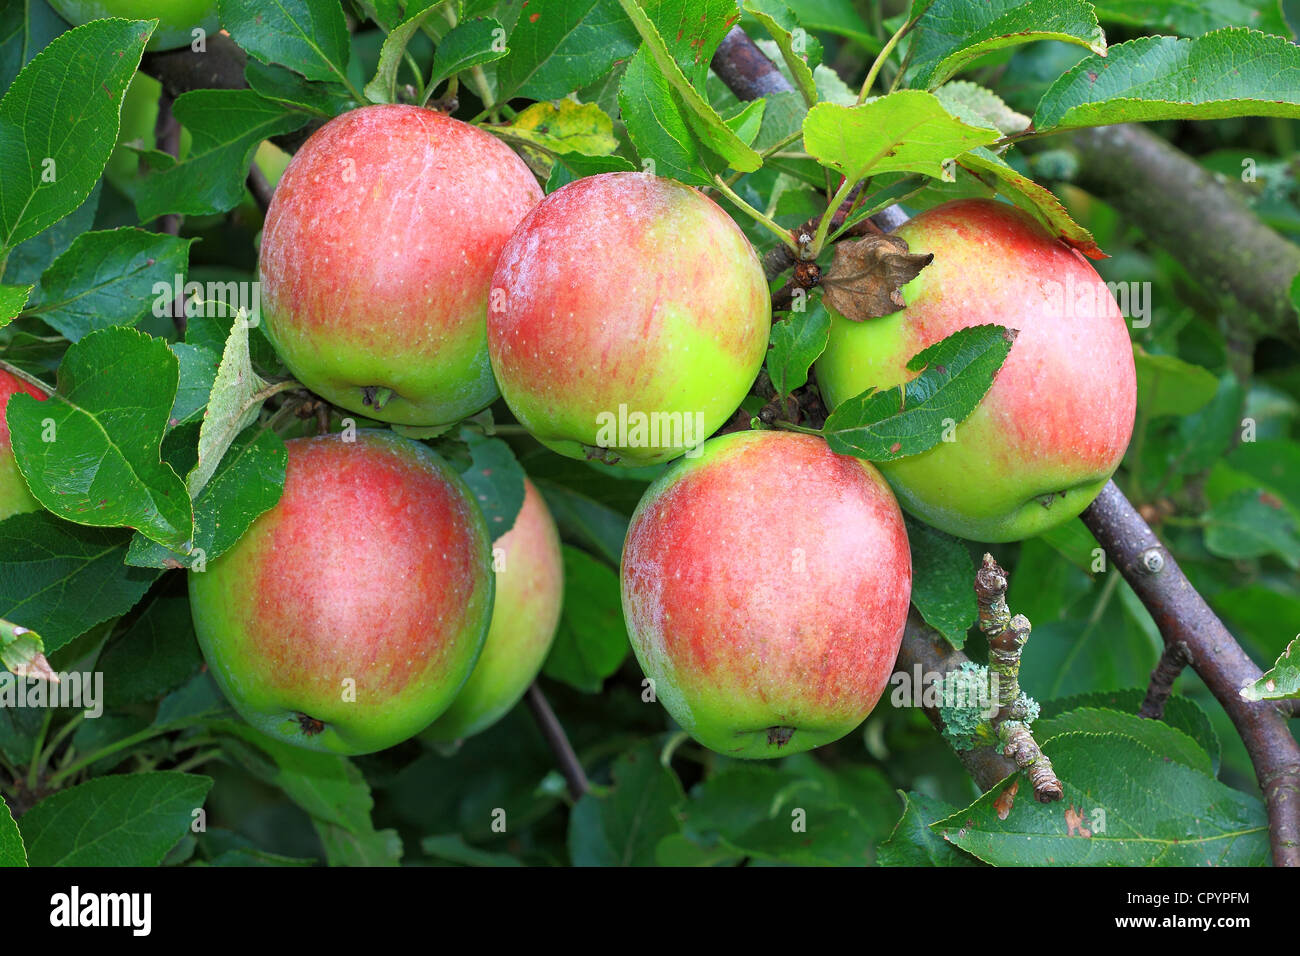 Untreated apples growing on an apple tree Stock Photo